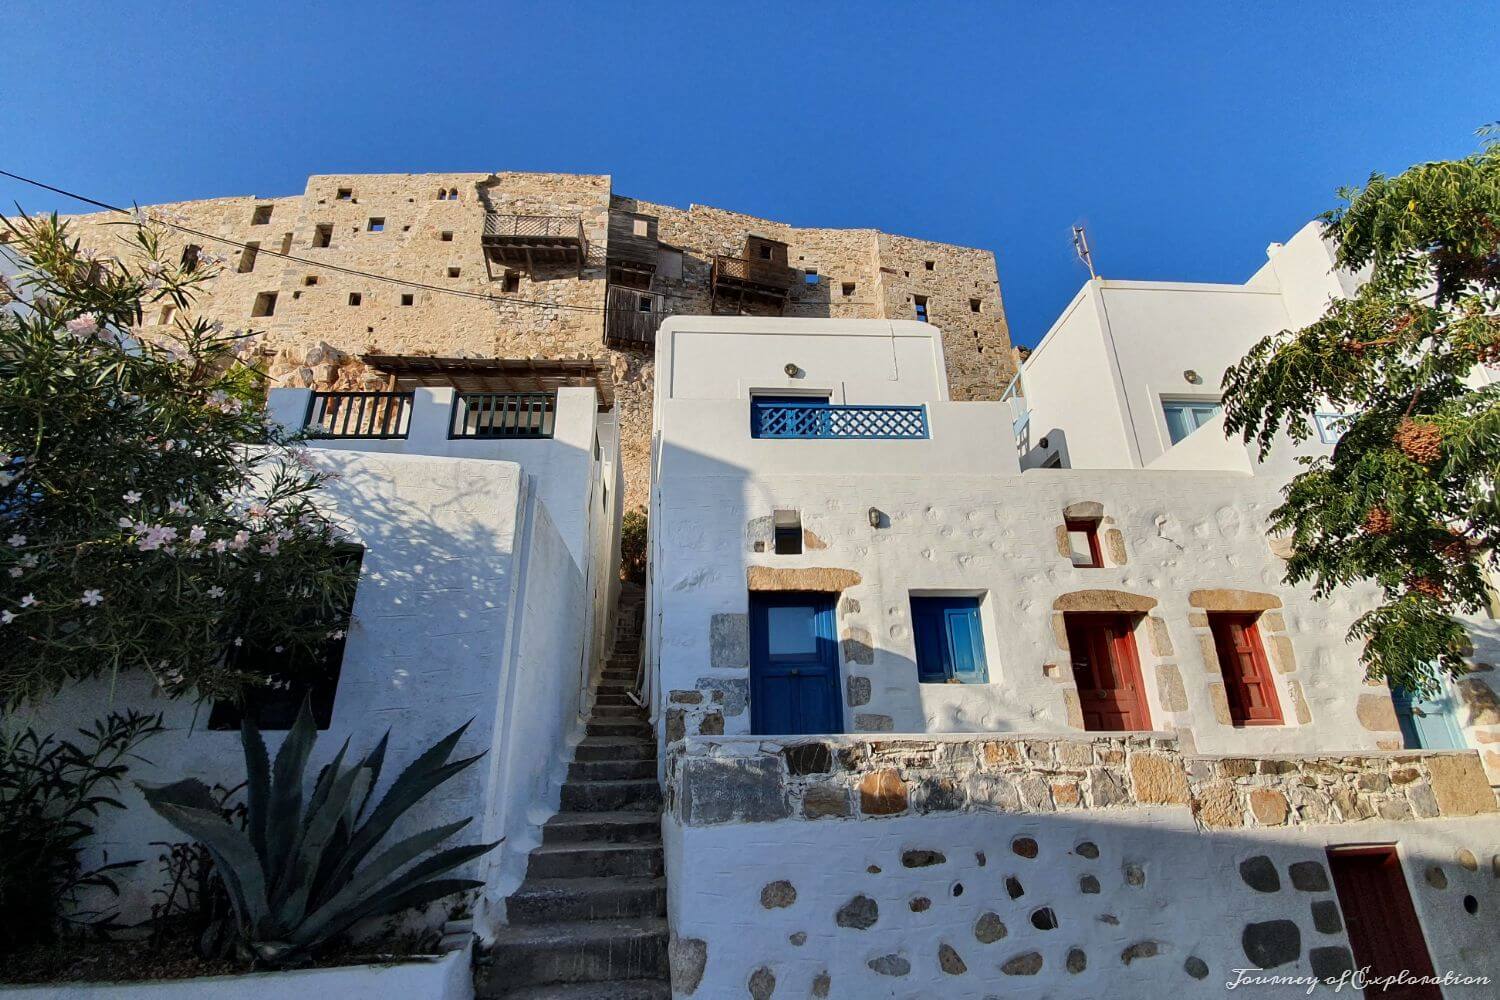 View of the castle above the whitewashed house of Chora